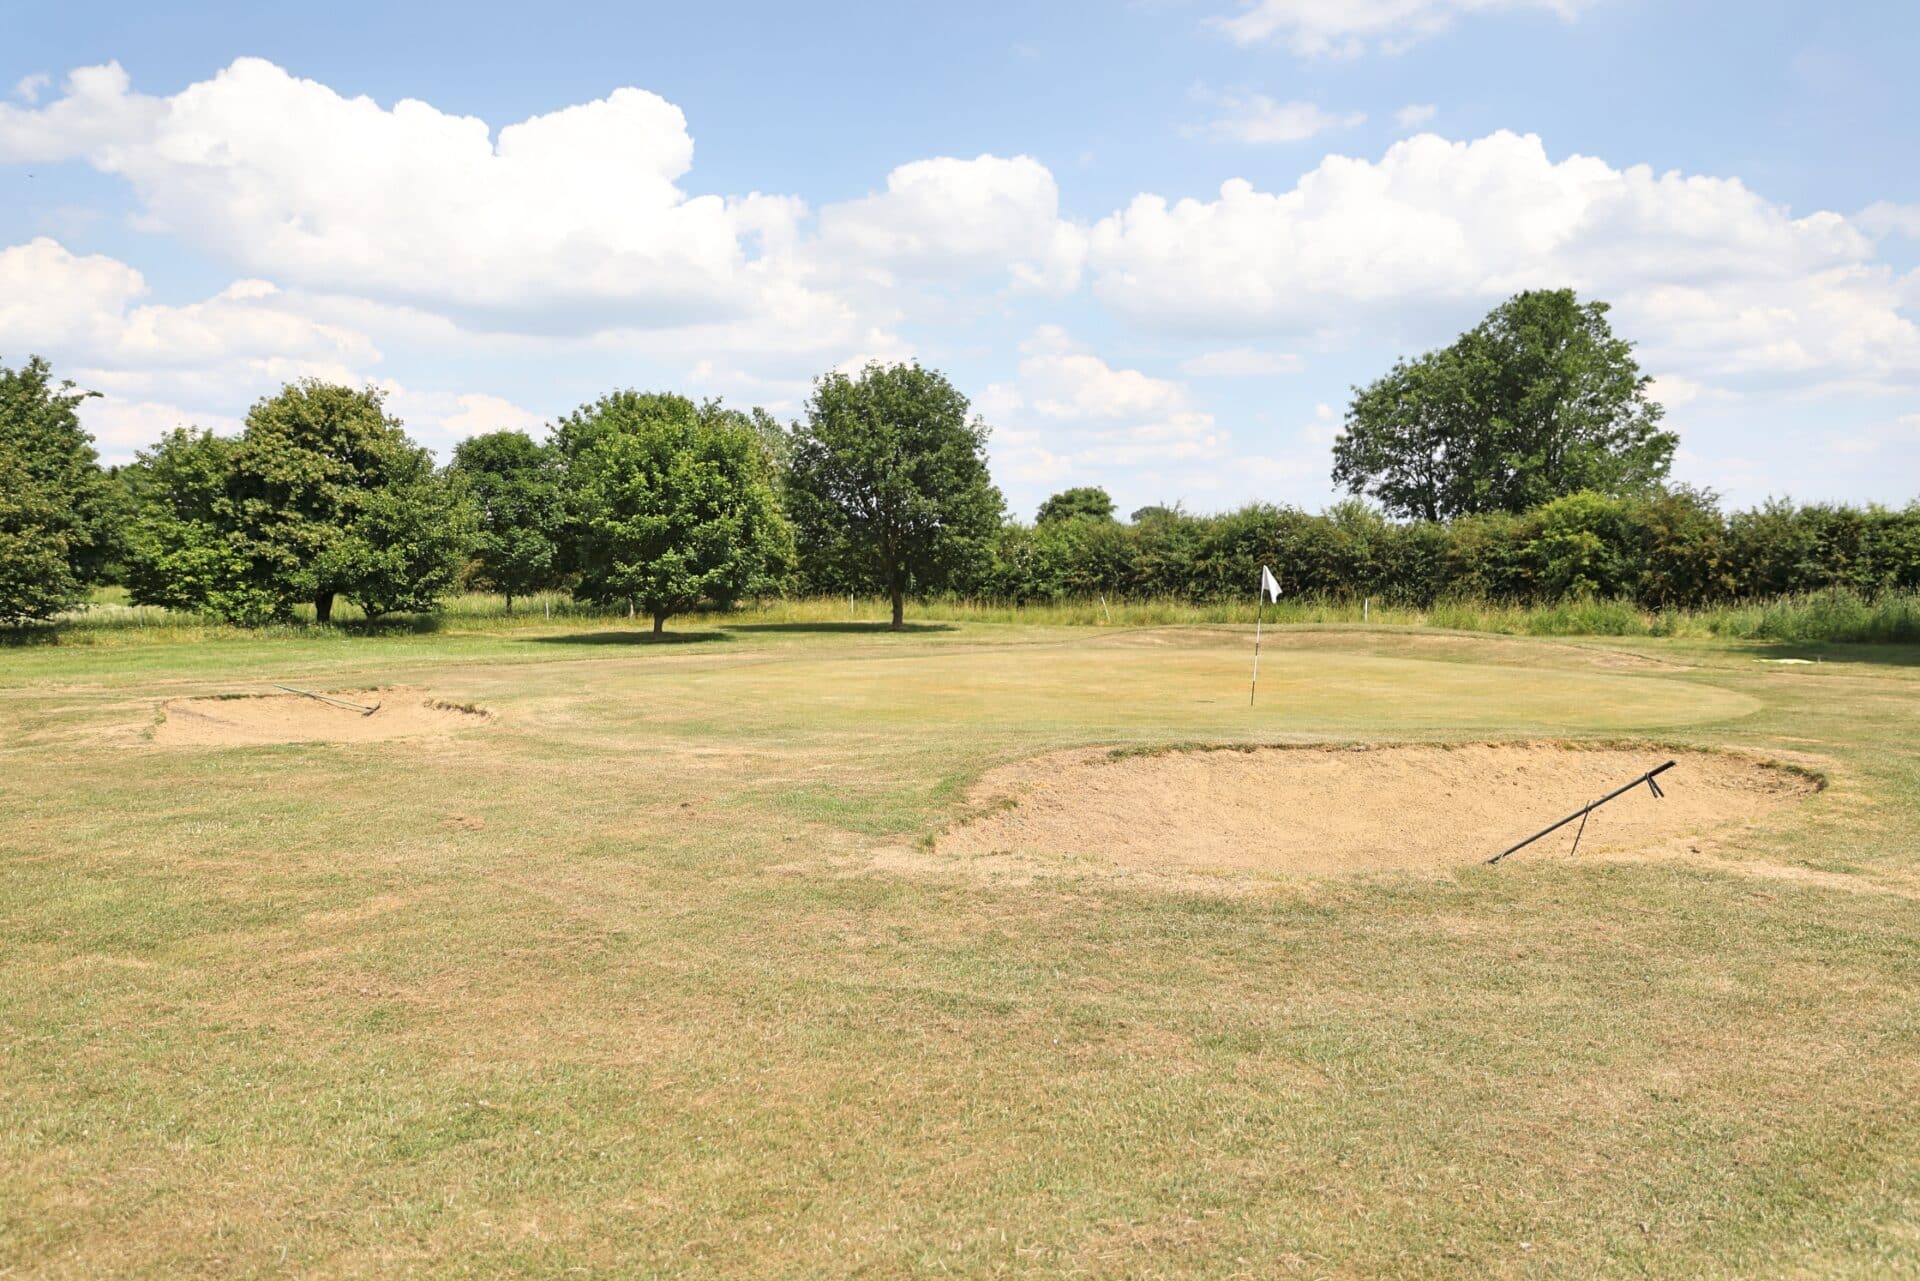 Henlow Golf Course hole 3 image 1